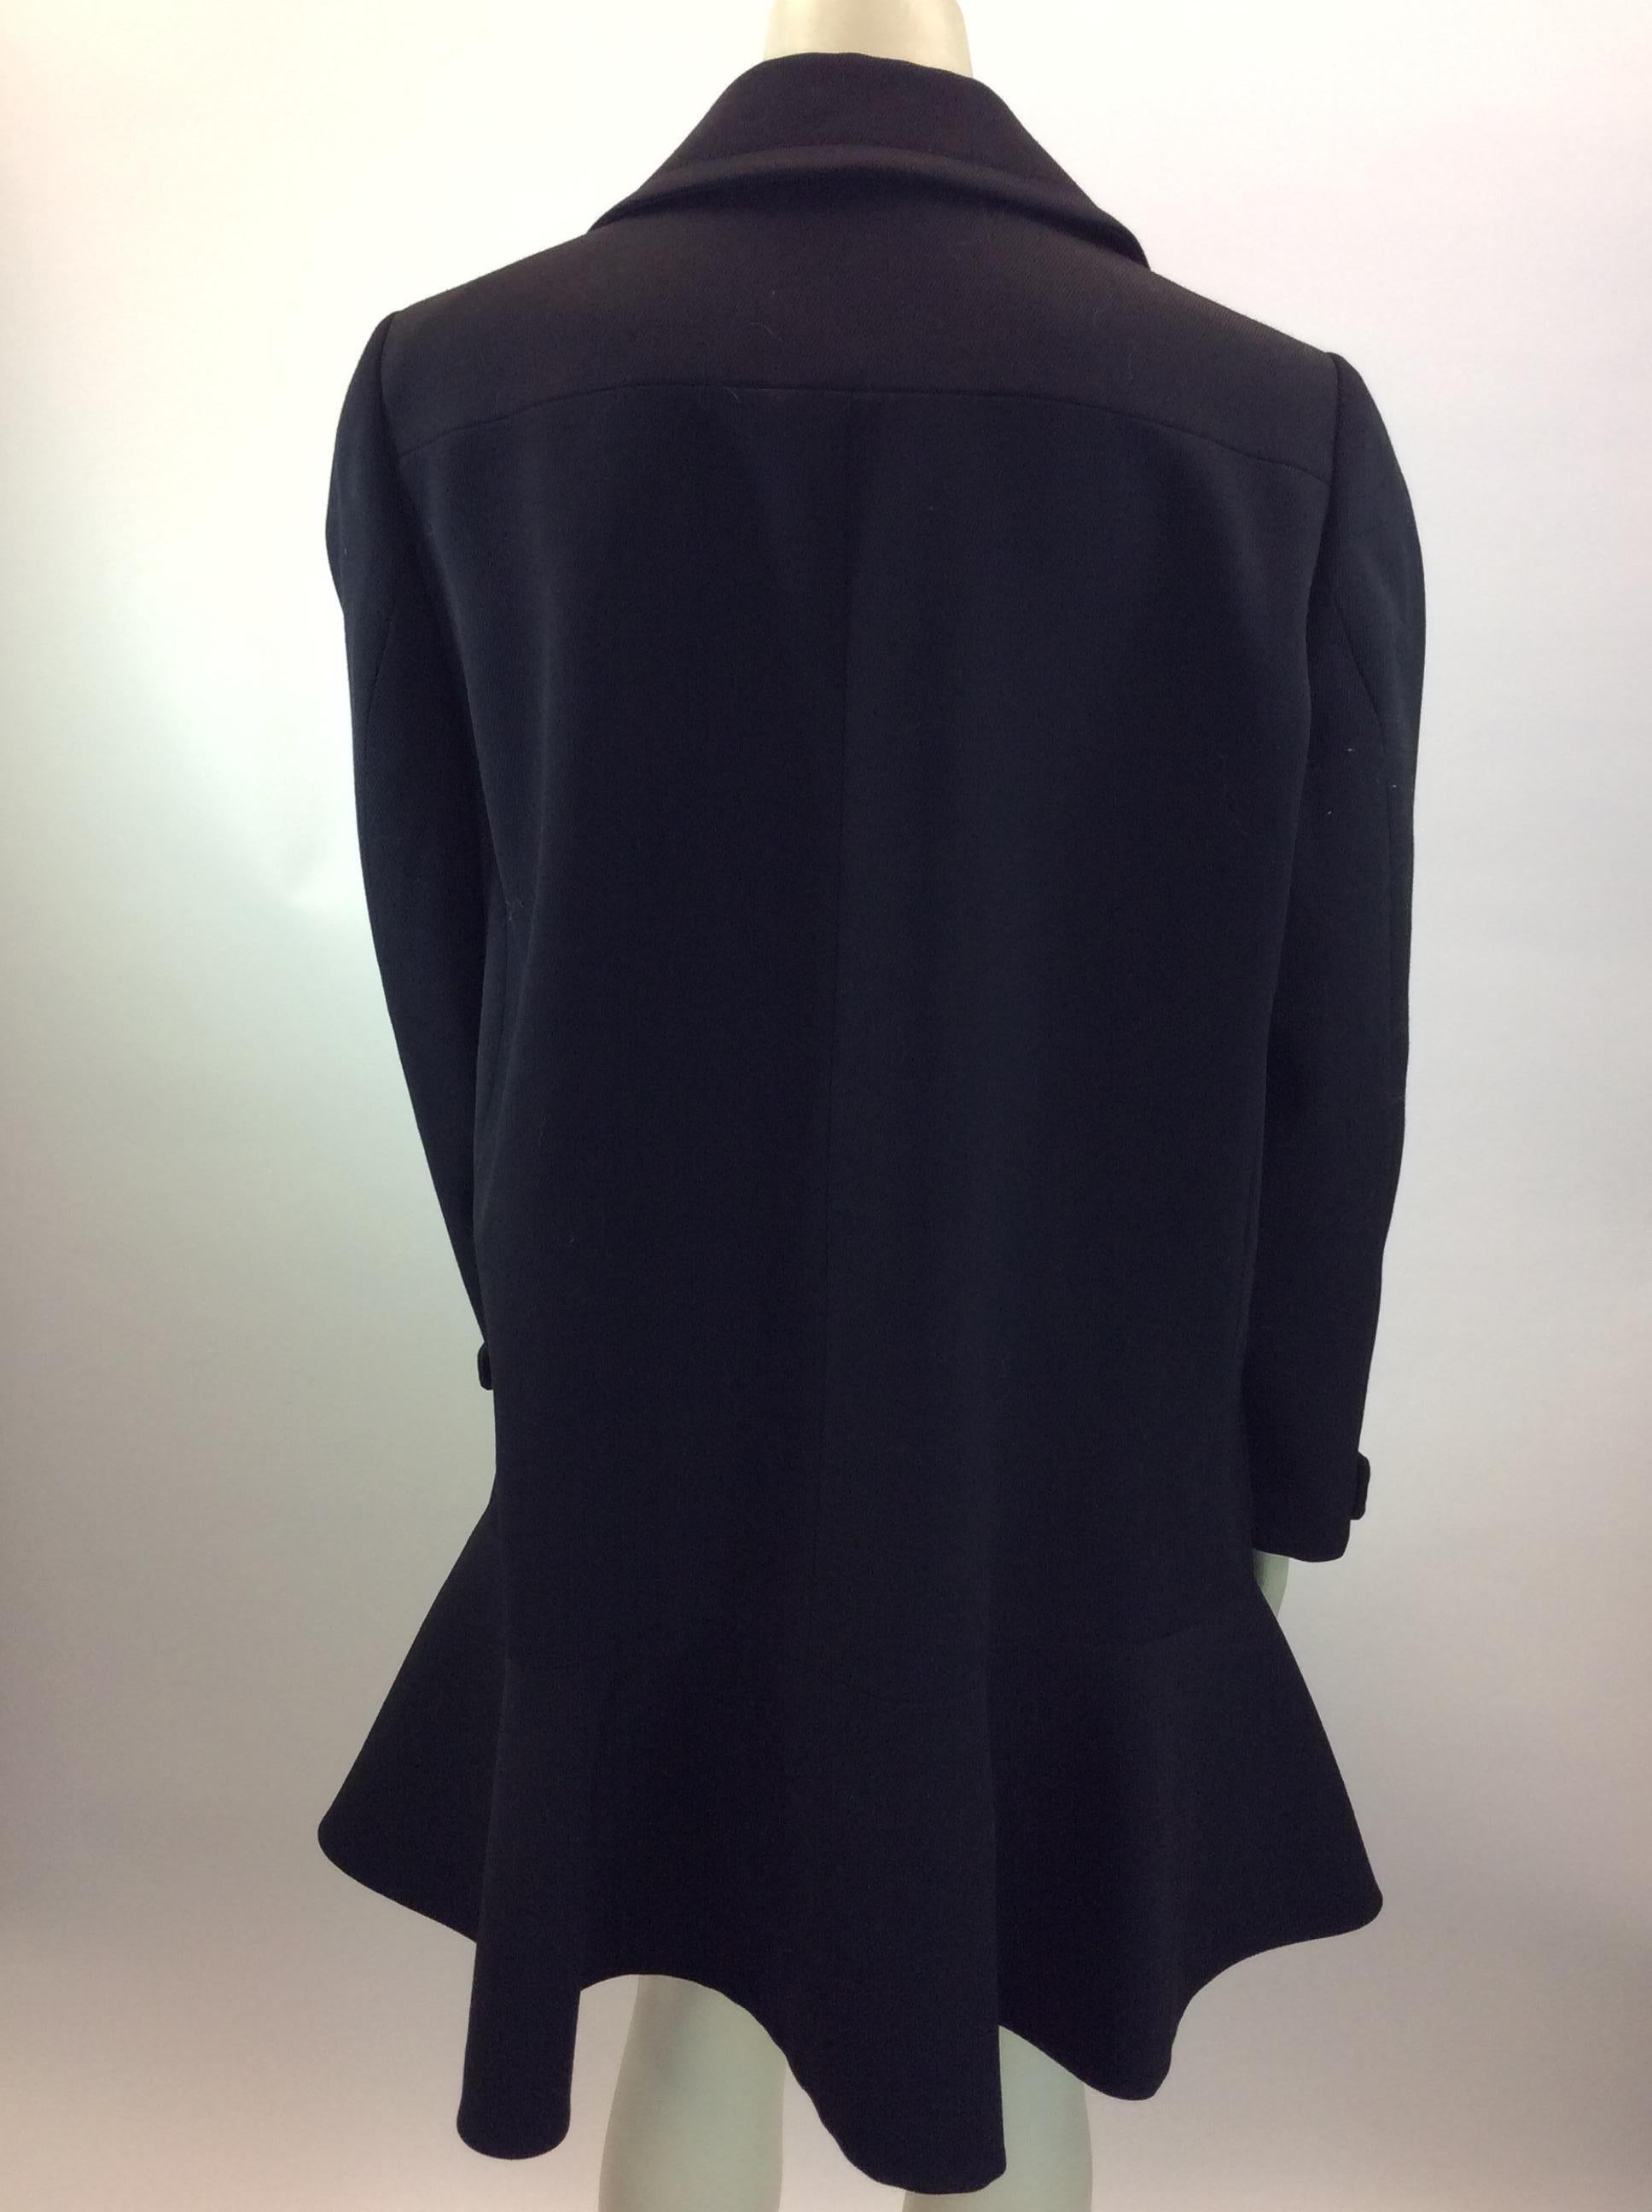 Miu Miu Black Wool Coat In Good Condition For Sale In Narberth, PA